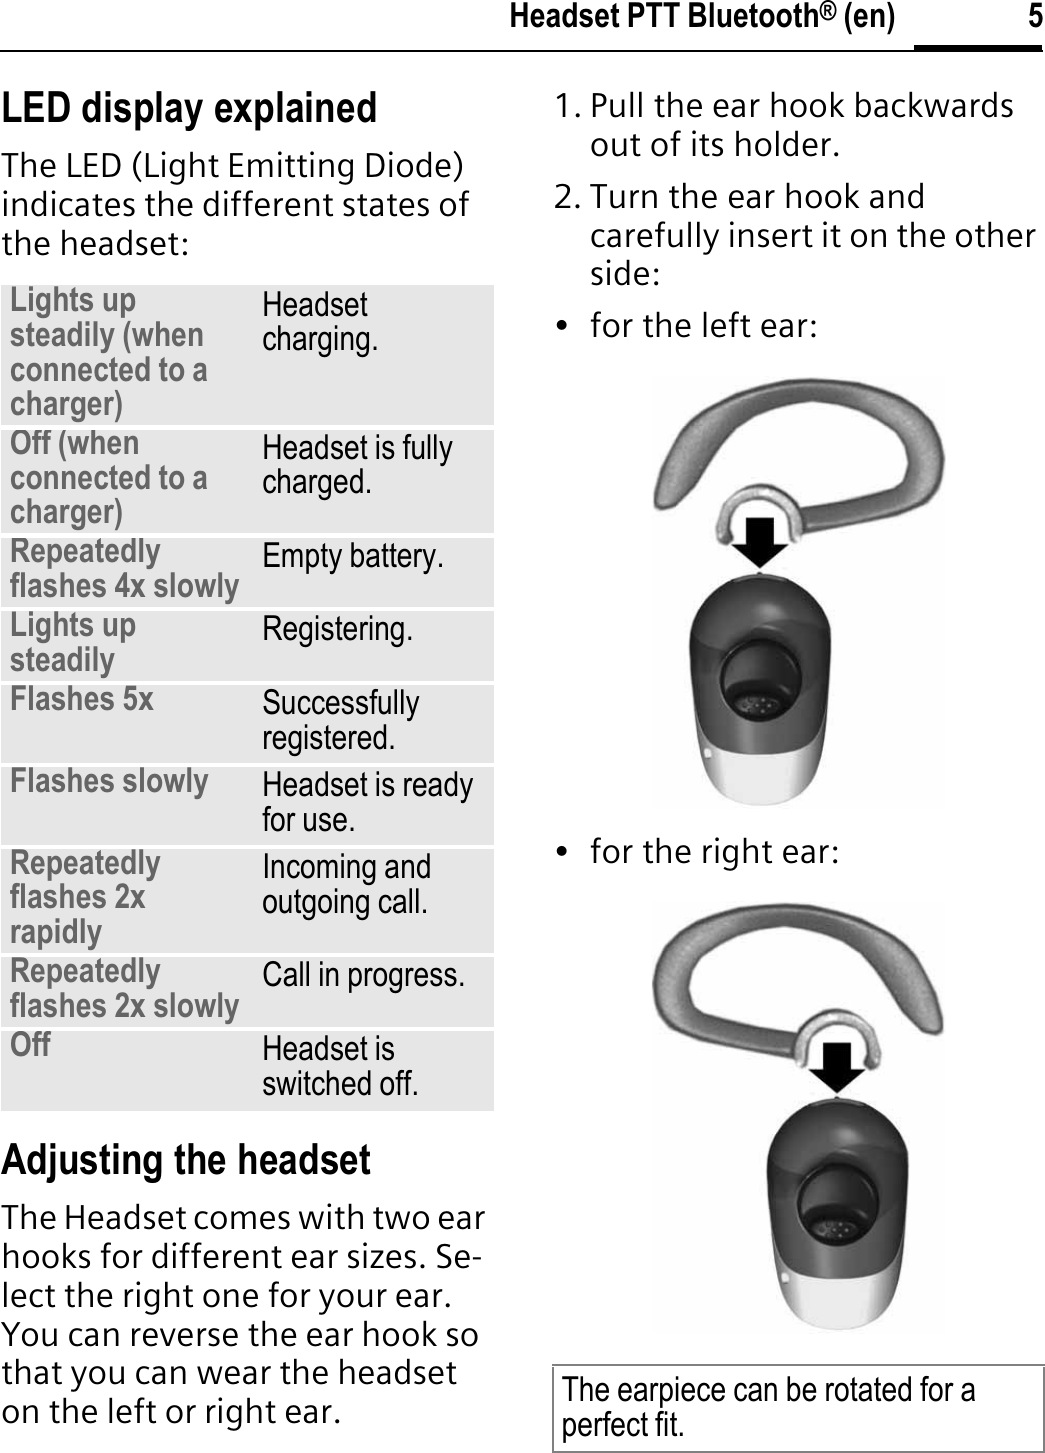 5Headset PTT Bluetooth® (en)LED display explainedThe LED (Light Emitting Diode) indicates the different states of the headset:Adjusting the headset The Headset comes with two ear hooks for different ear sizes. Se-lect the right one for your ear. You can reverse the ear hook so that you can wear the headset on the left or right ear. 1. Pull the ear hook backwards out of its holder.2. Turn the ear hook and carefully insert it on the other side:• for the left ear:• for the right ear:Lights up steadily (when connected to a charger)Headset charging.Off (when connected to a charger)Headset is fully charged.Repeatedly flashes 4x slowly Empty battery.Lights up steadily Registering.Flashes 5x Successfully registered.Flashes slowly Headset is ready for use.Repeatedly flashes 2x rapidlyIncoming and outgoing call.Repeatedly flashes 2x slowly Call in progress.Off Headset is switched off.The earpiece can be rotated for a perfect fit.